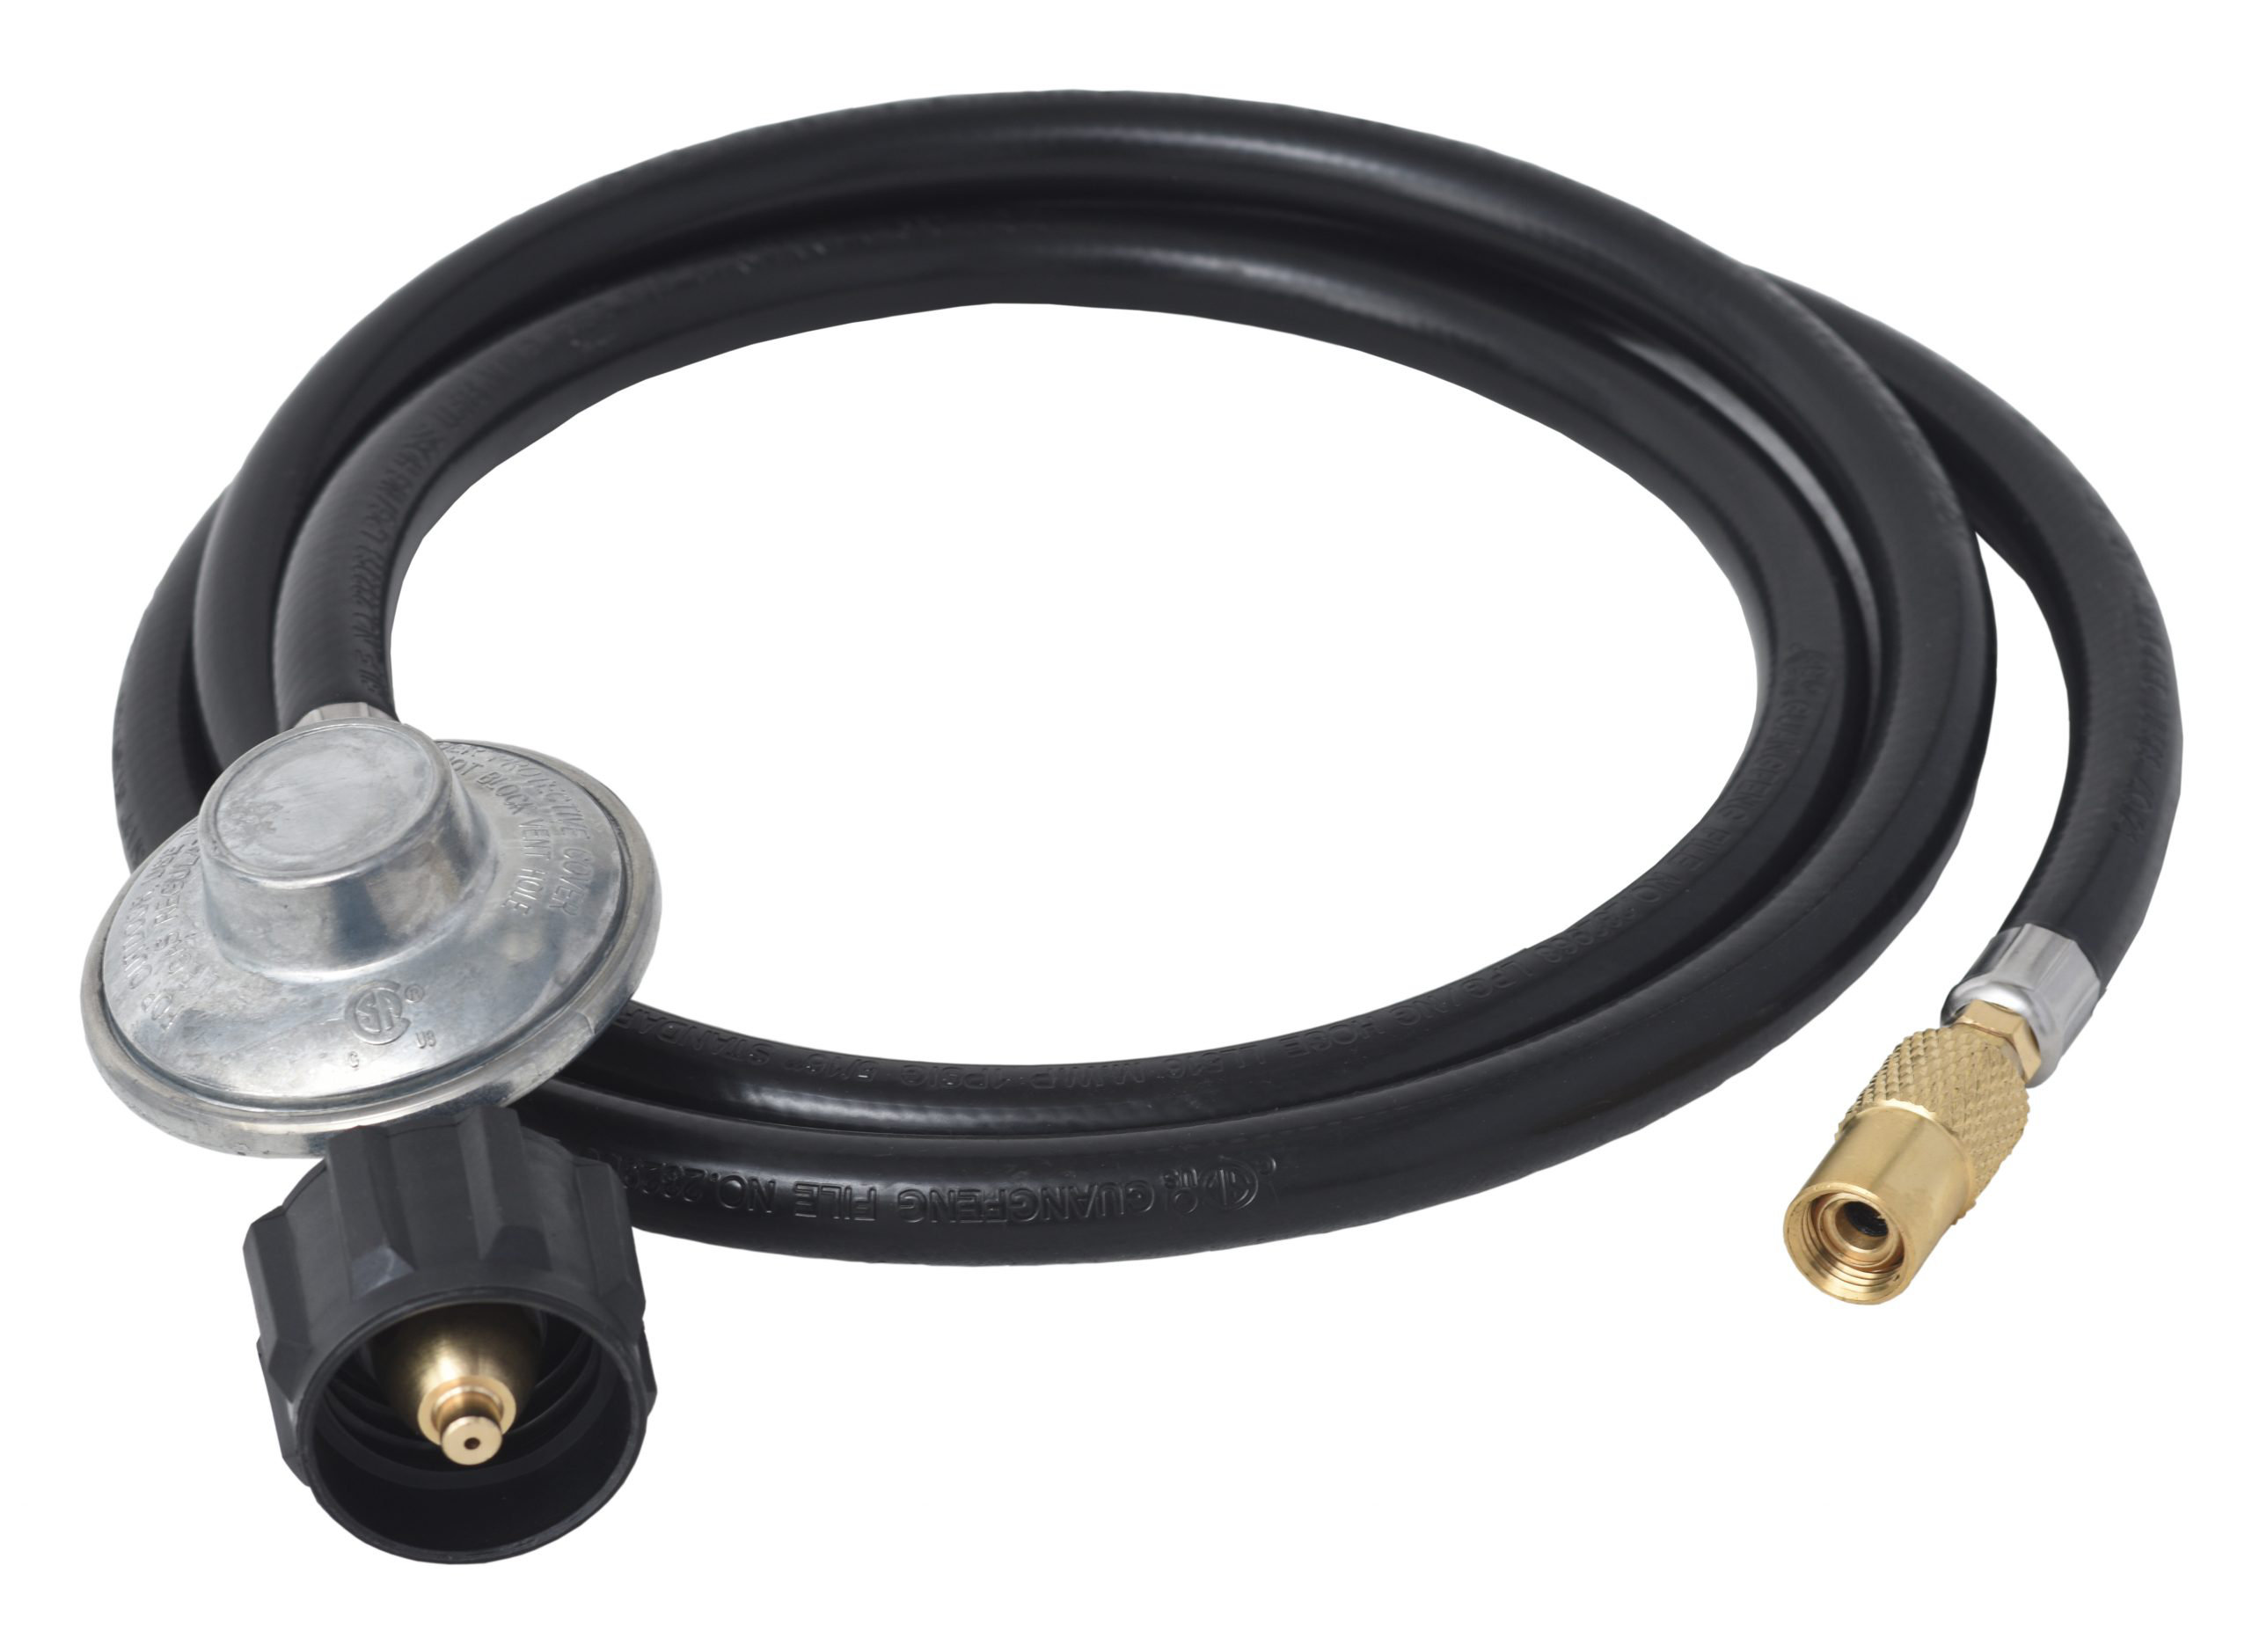 Flame King 6-Ft Propane Regulator Hose Adapter Connects to 20Lb Tank for  Flame King Blackstone Griddle